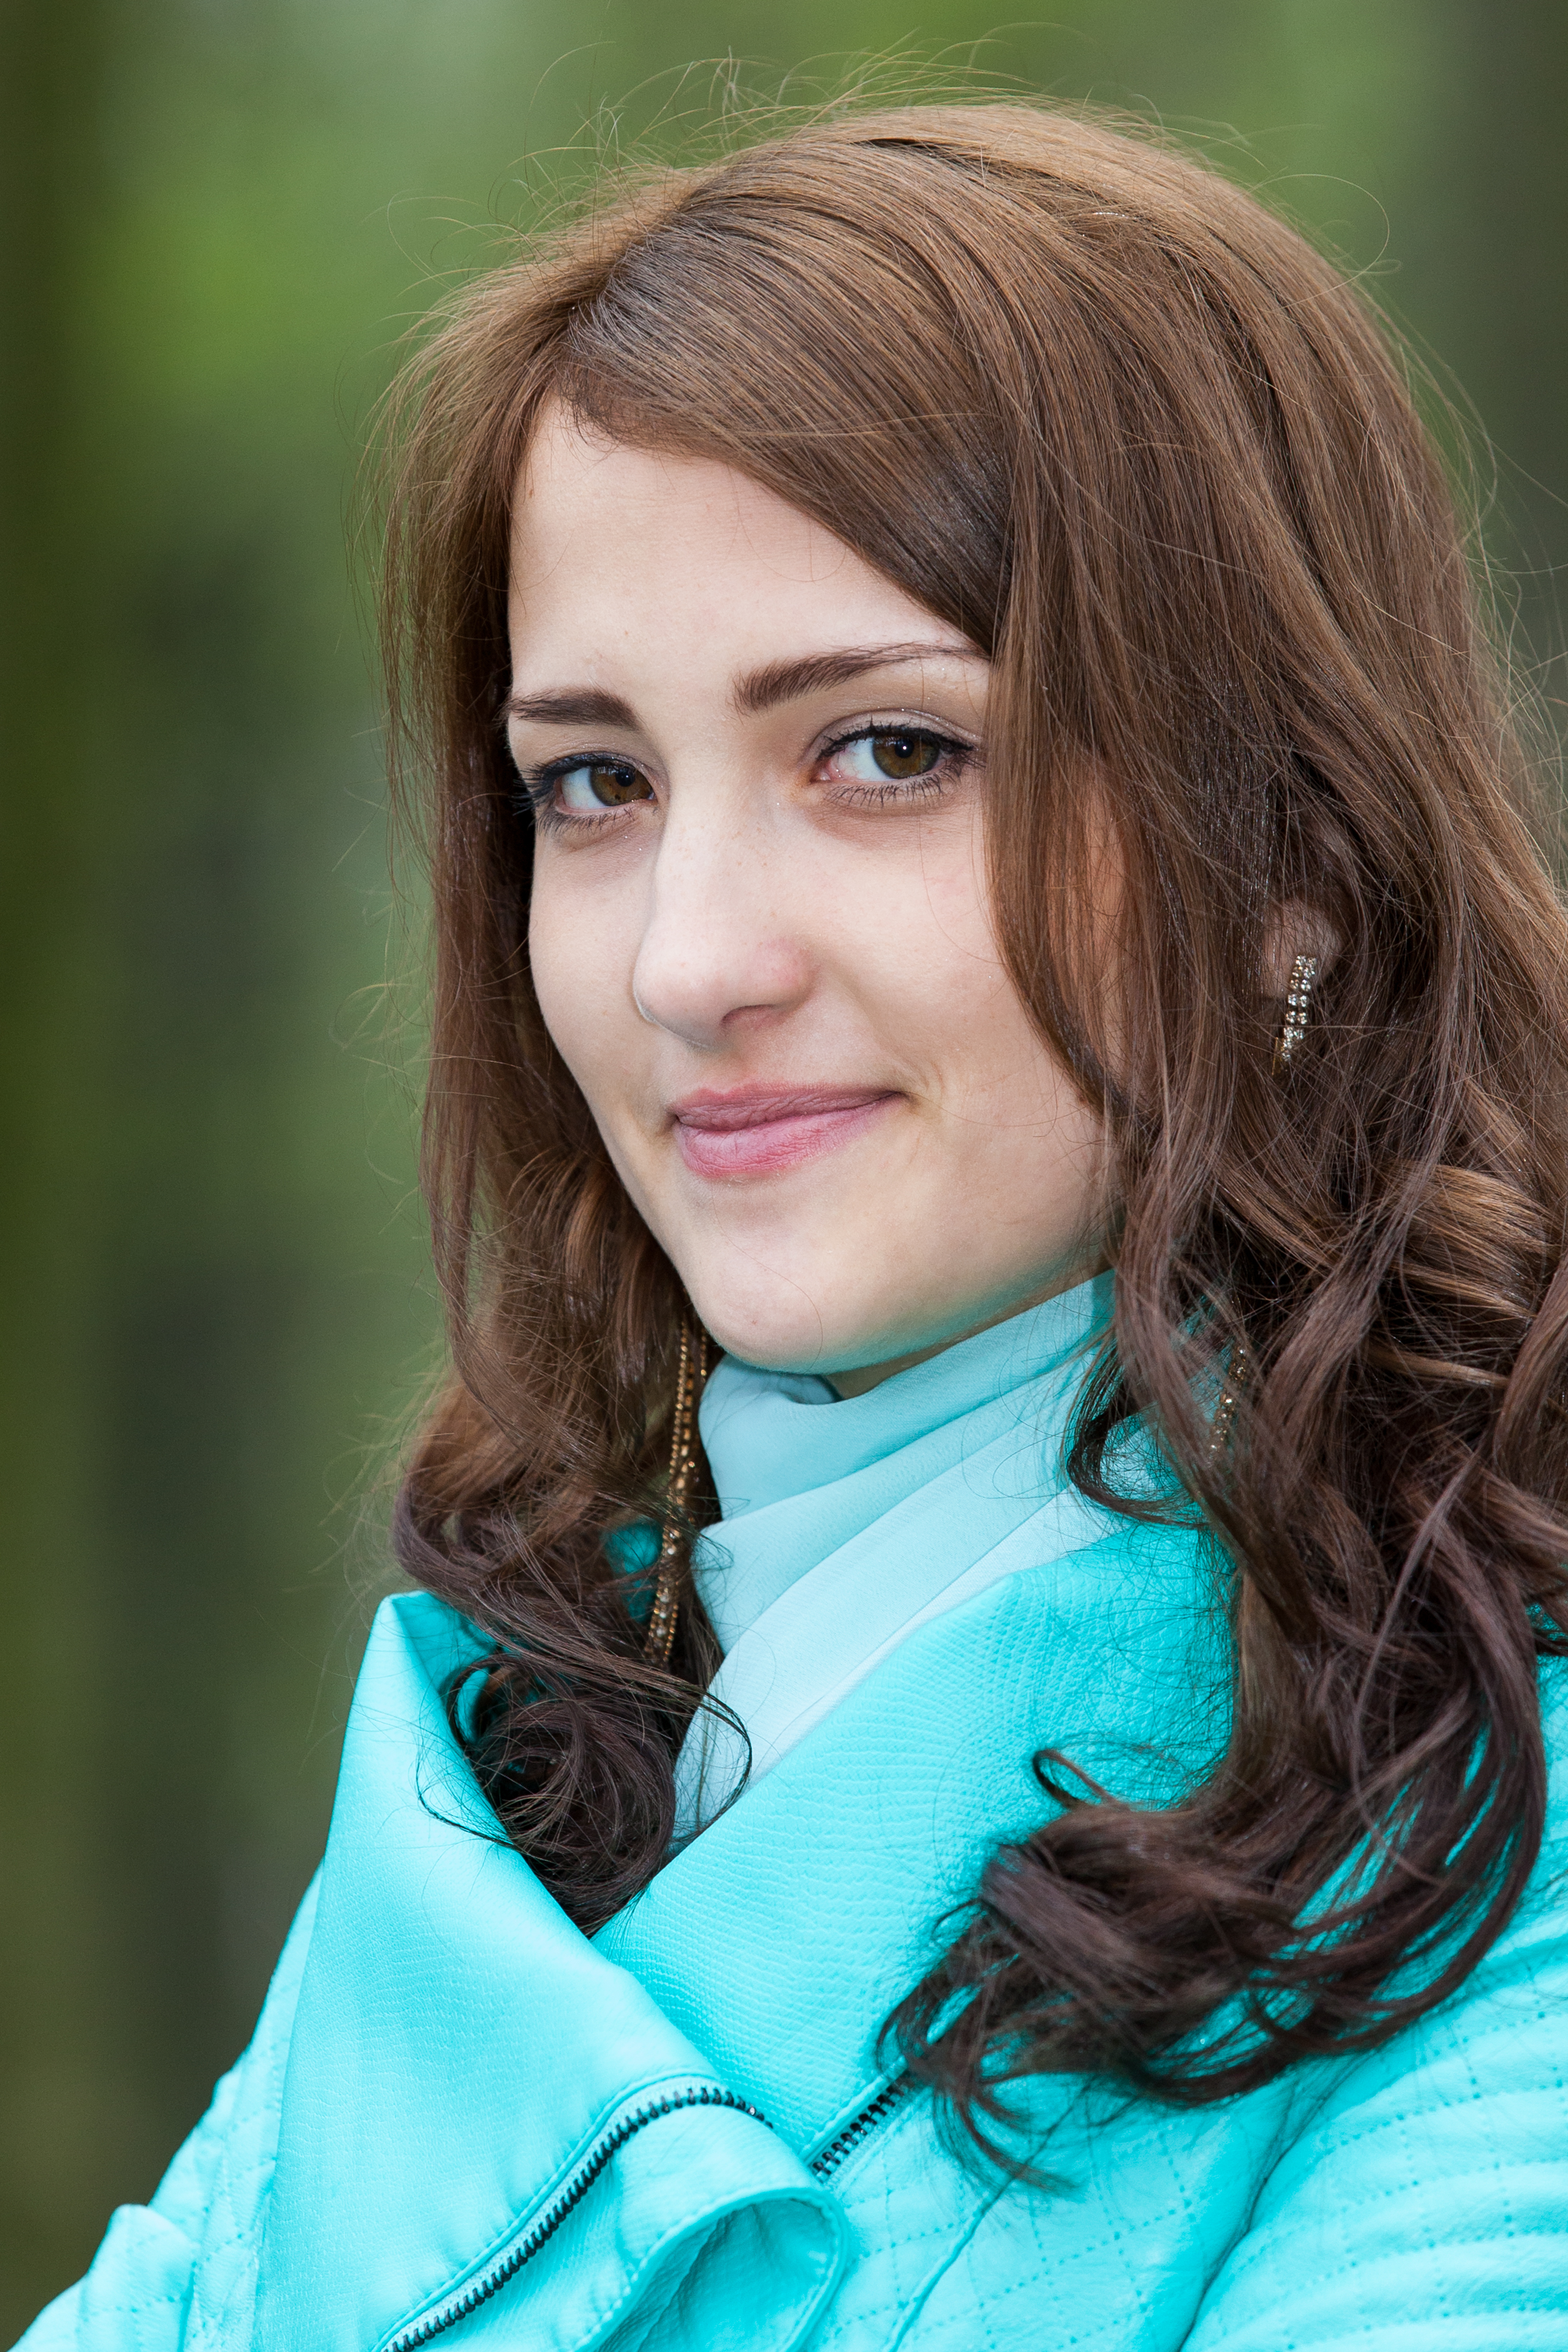 a young Catholic amazingly beautiful woman photographed in April 2014, picture 12/17